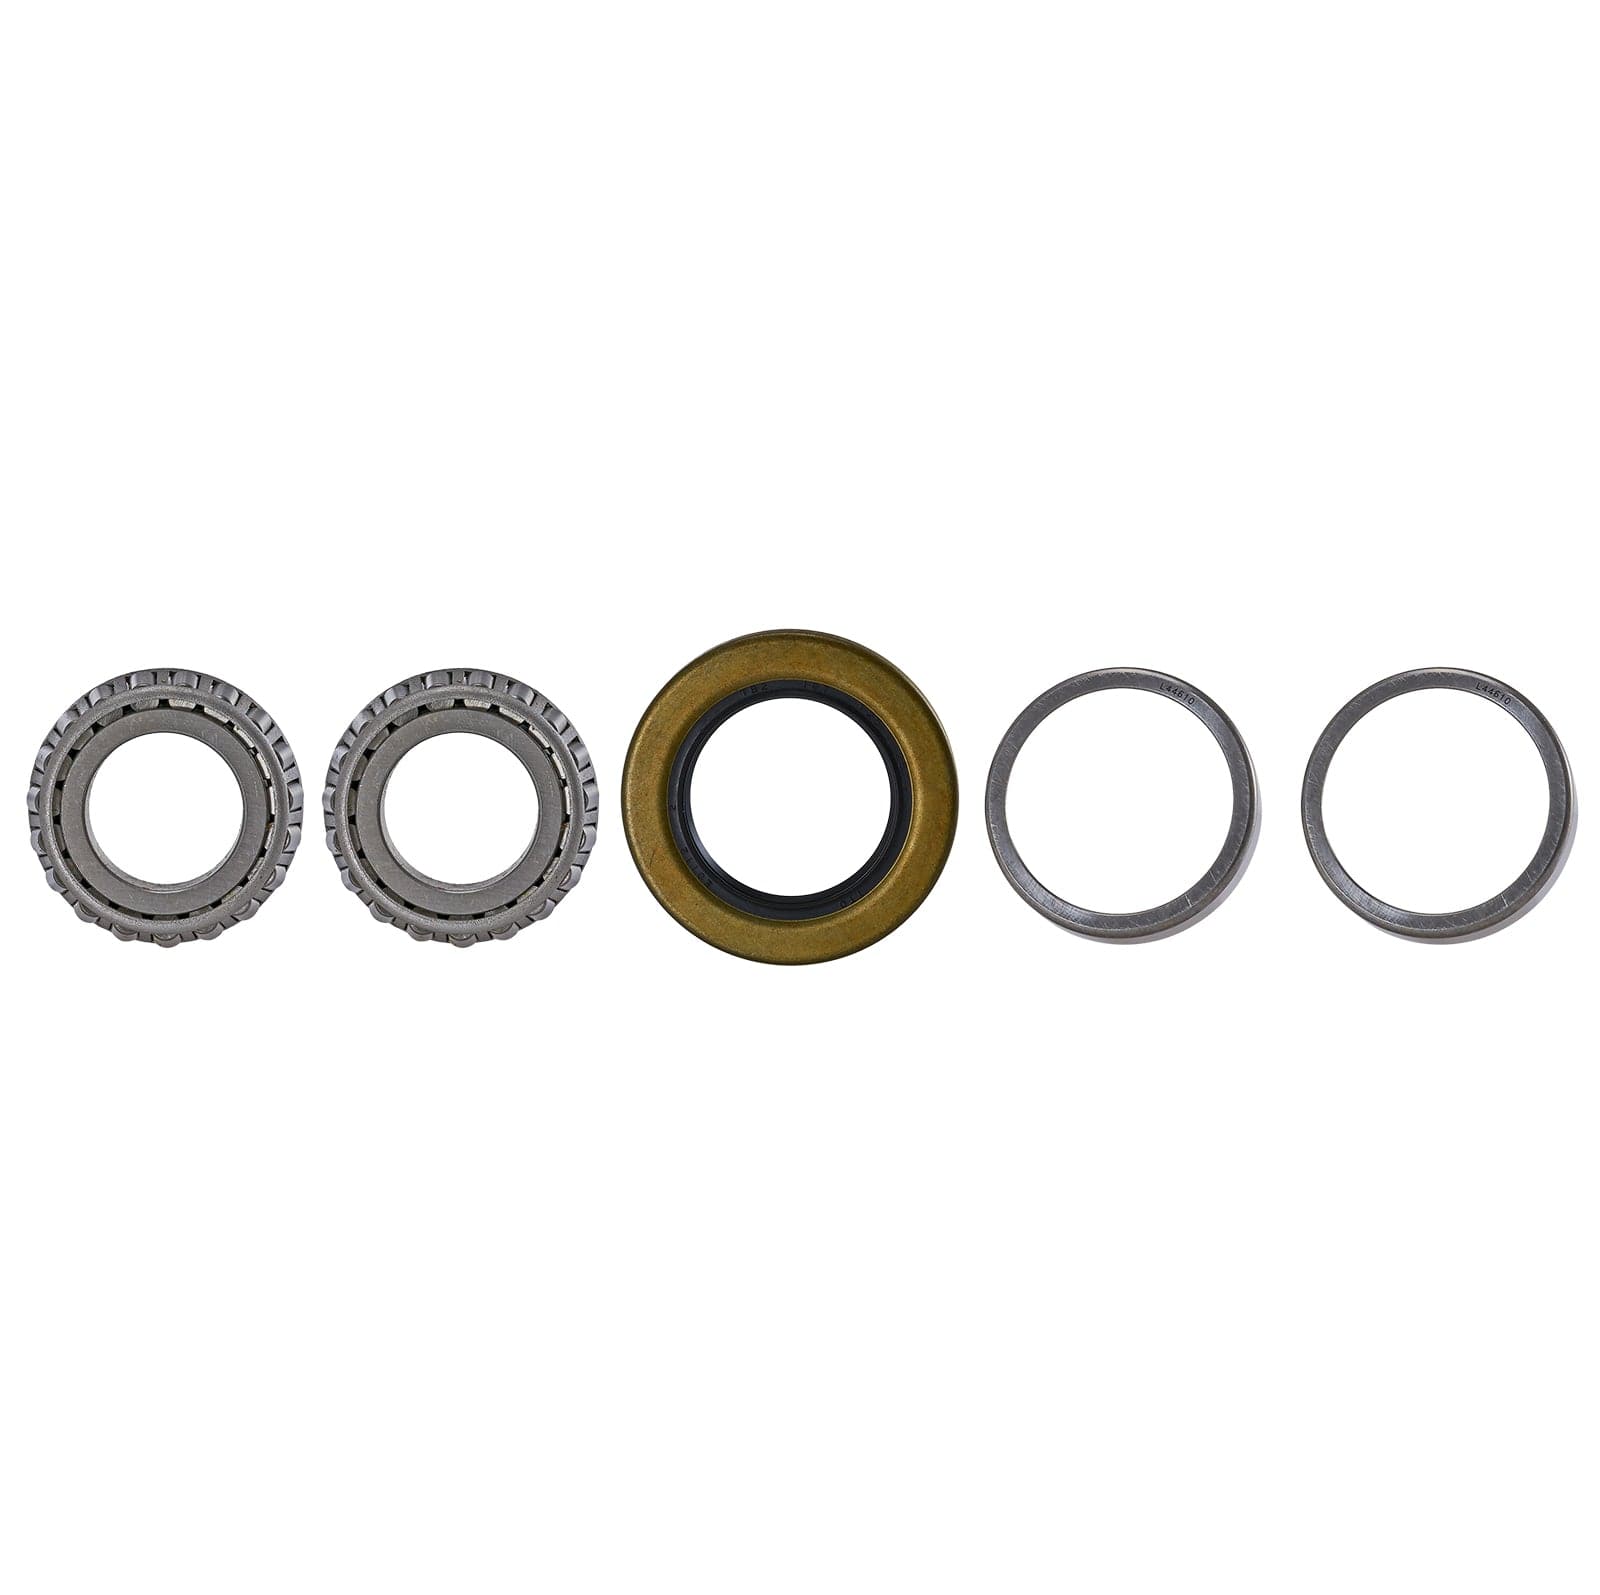 Trailer wheel bearing and seal kit for 1-1/ 16 spindle